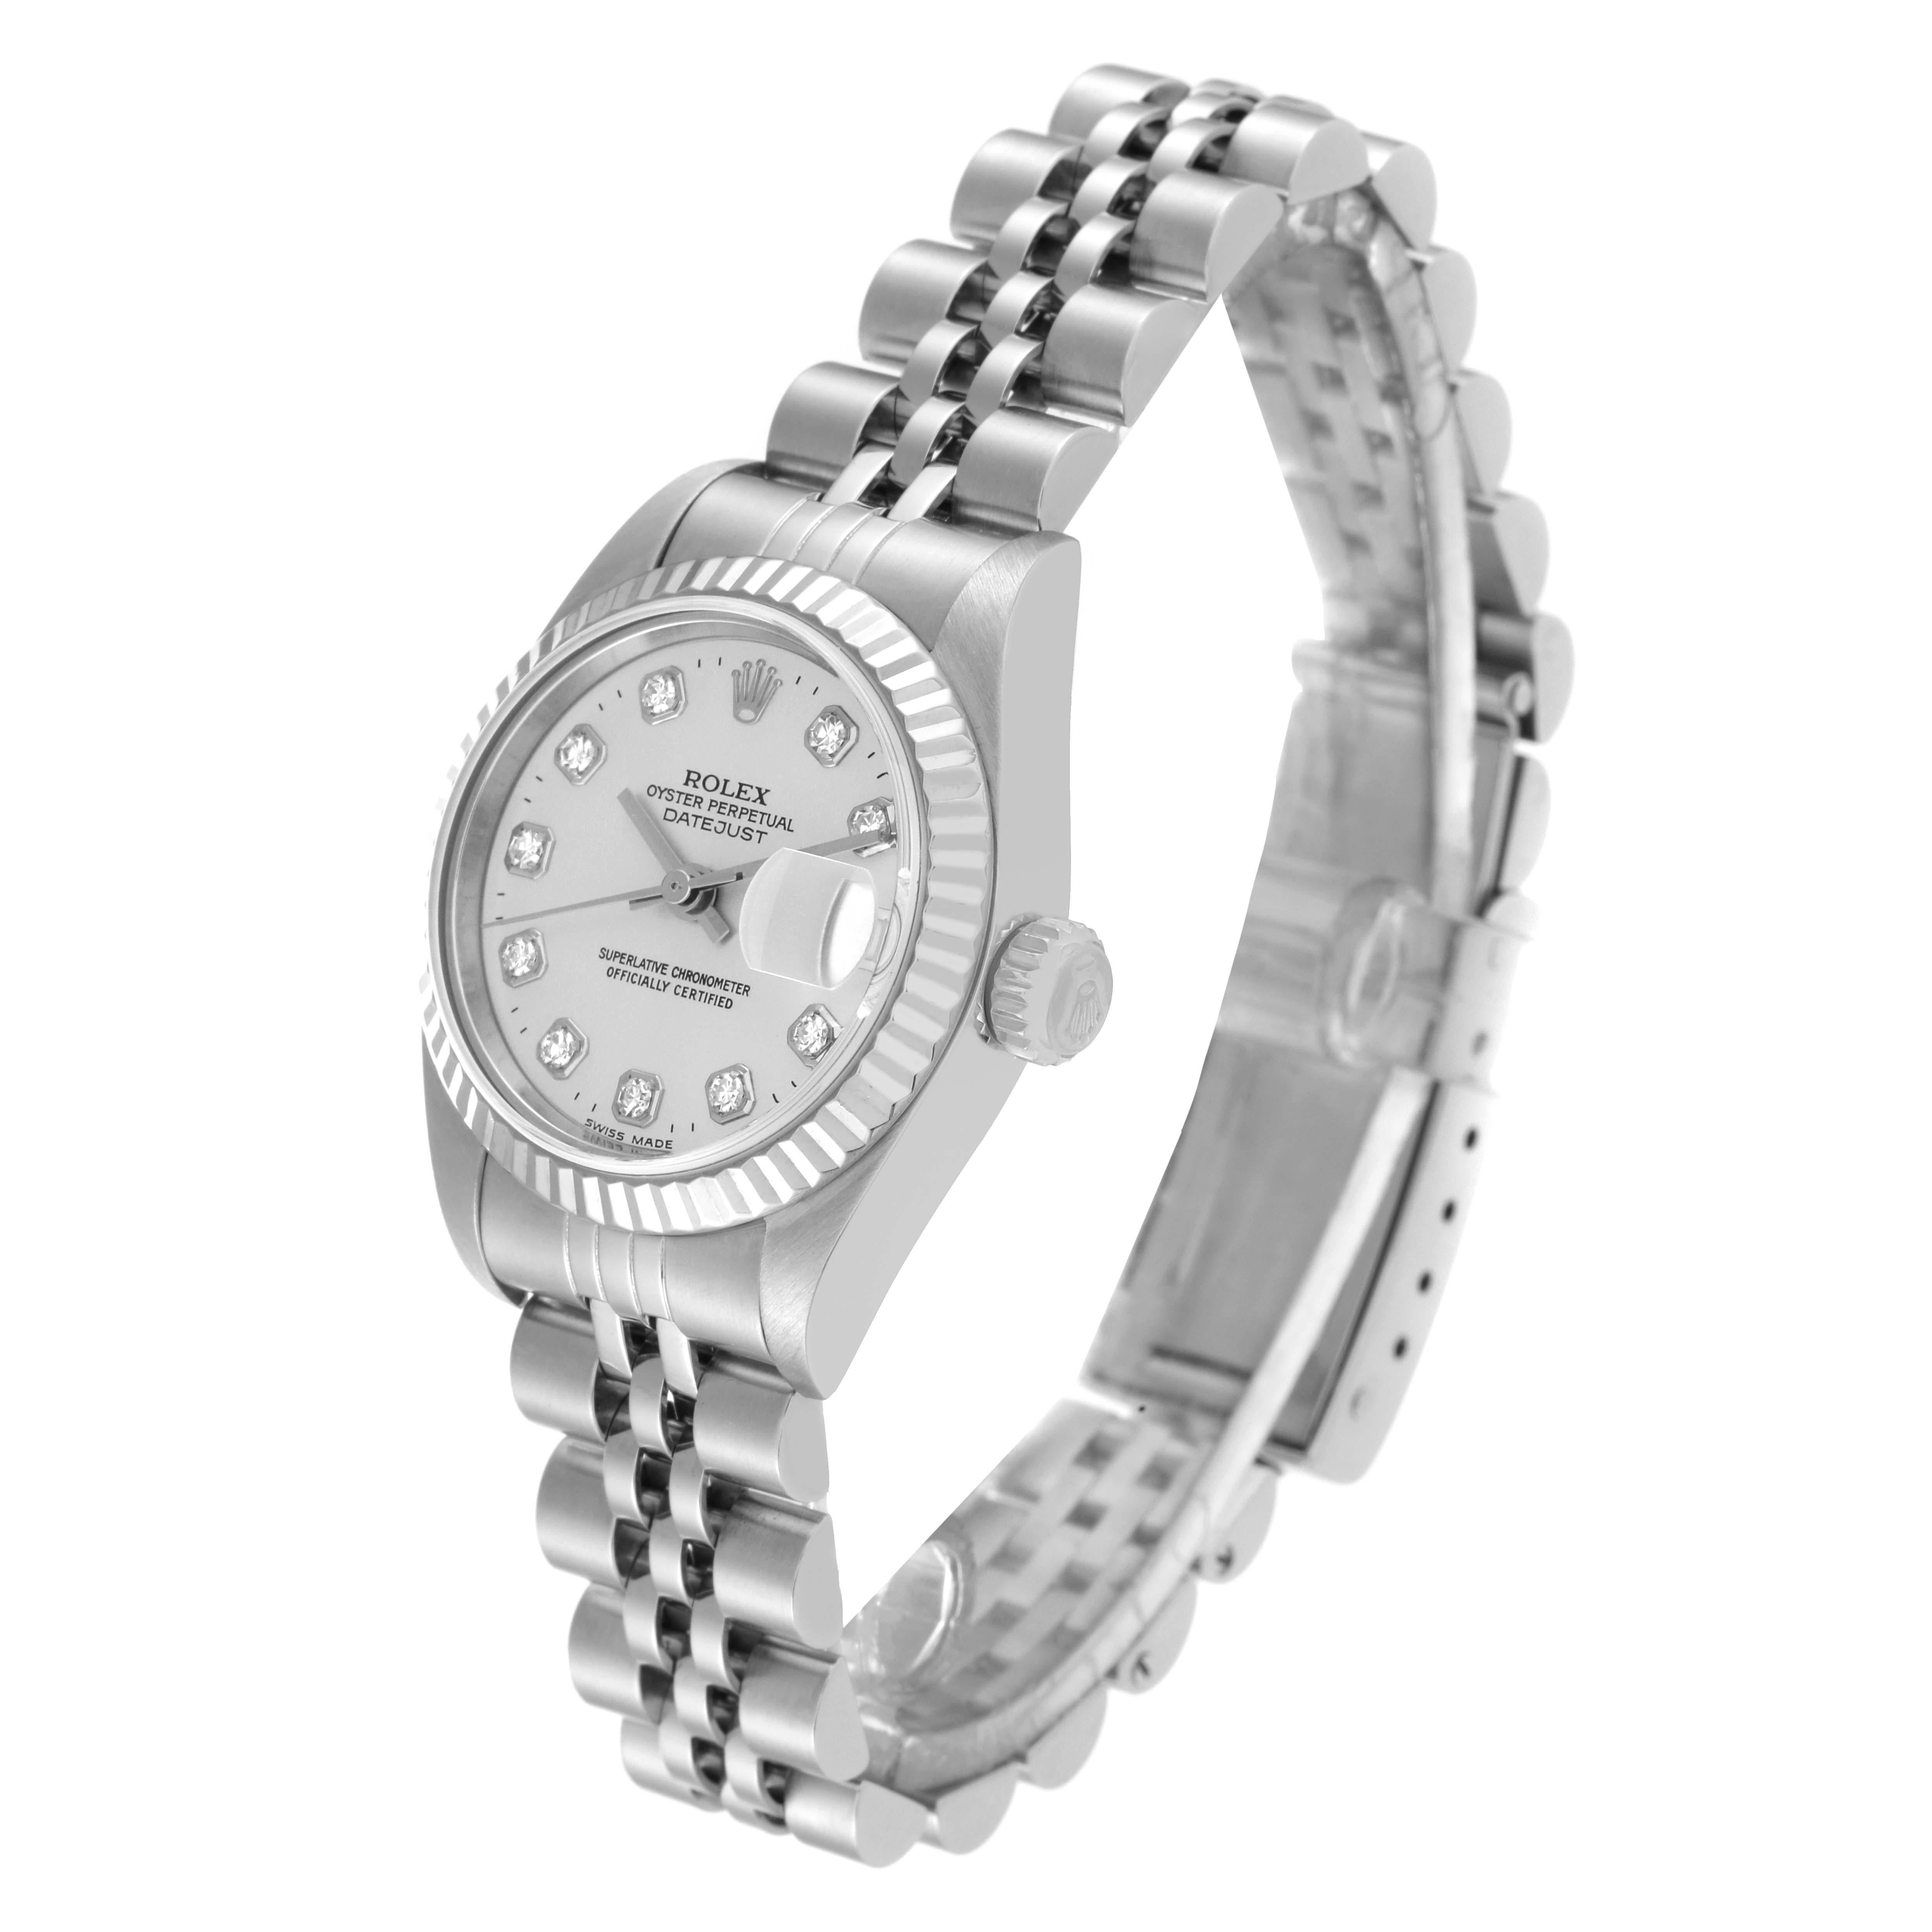 Women's Rolex Datejust Steel White Gold Diamond Dial Ladies Watch 79174 Box Papers